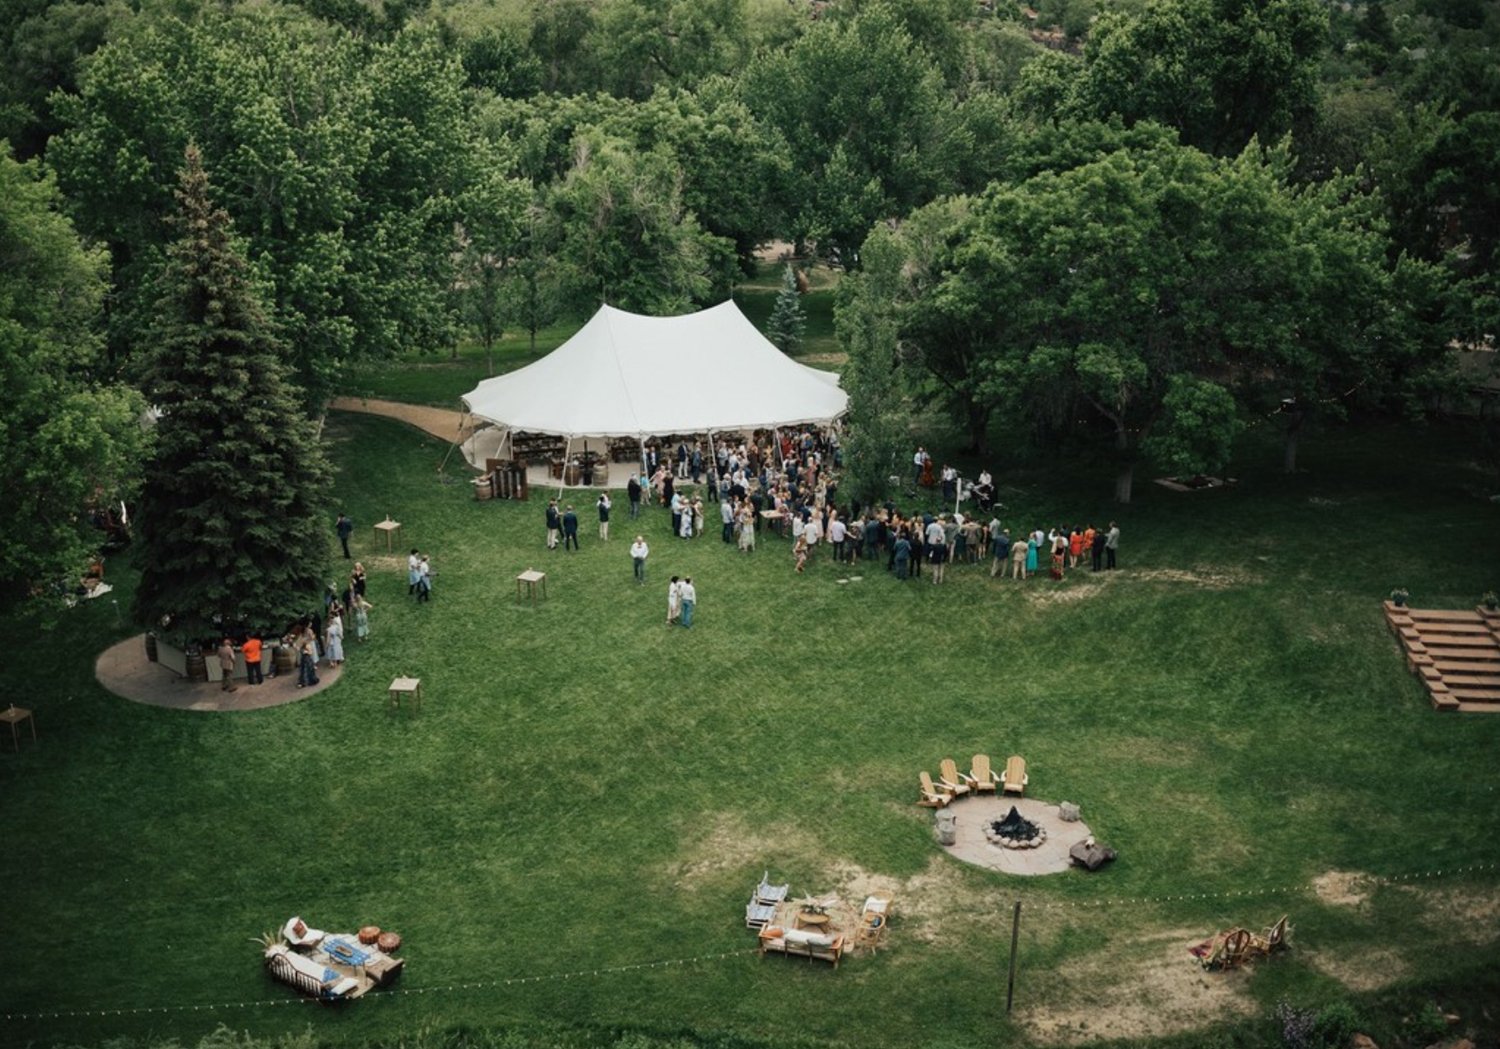 ig-riverbend-wedding-by-the-river-drone-view.jpg